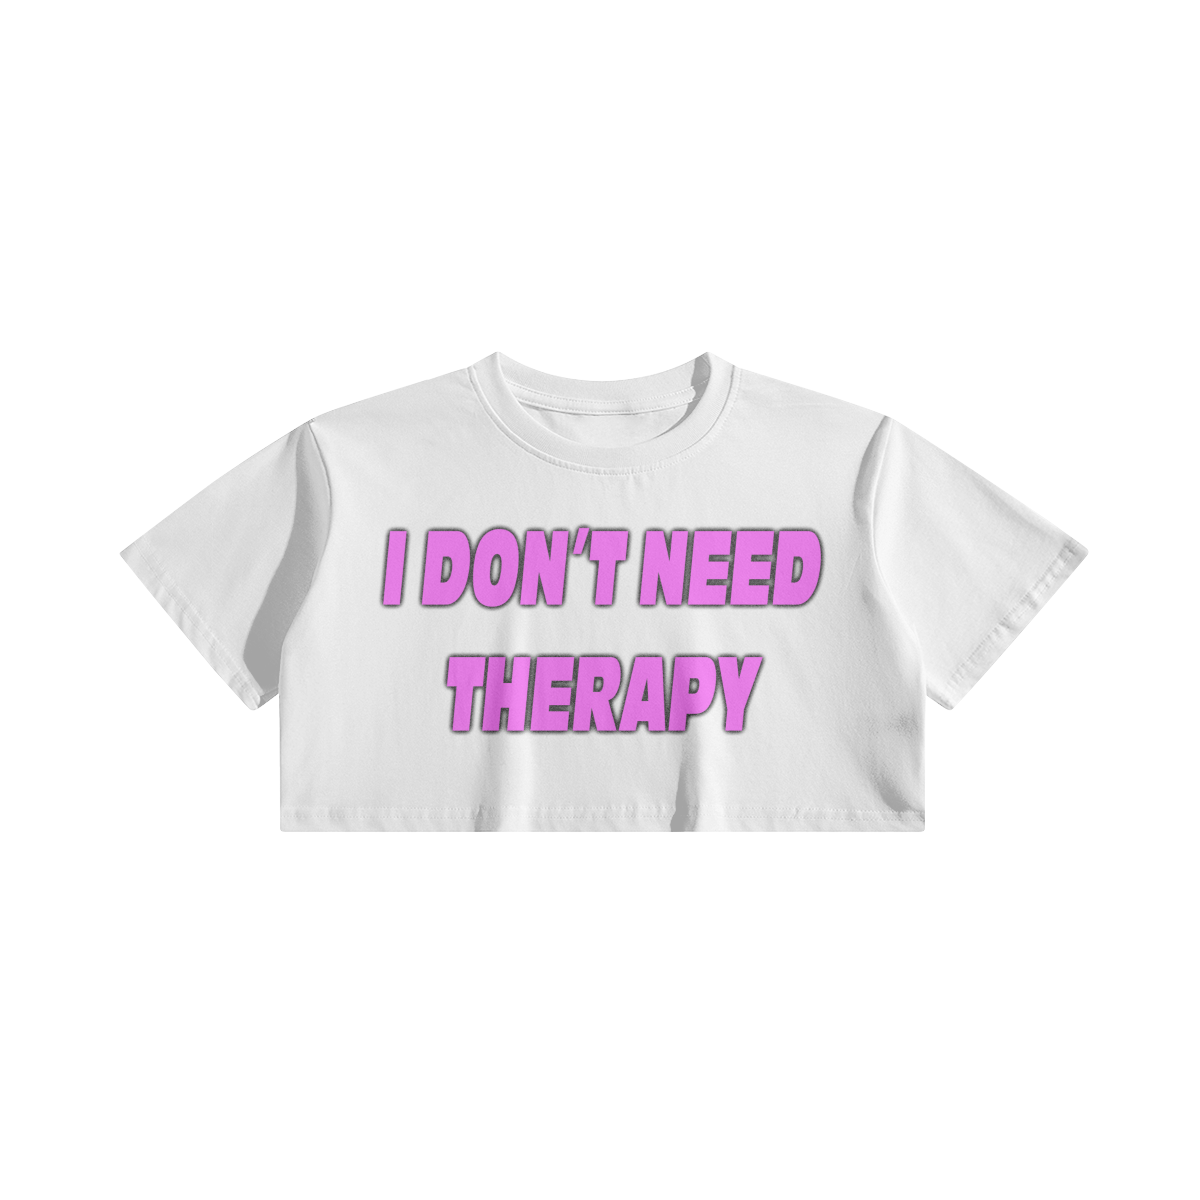 I Don't Need Therapy crop top